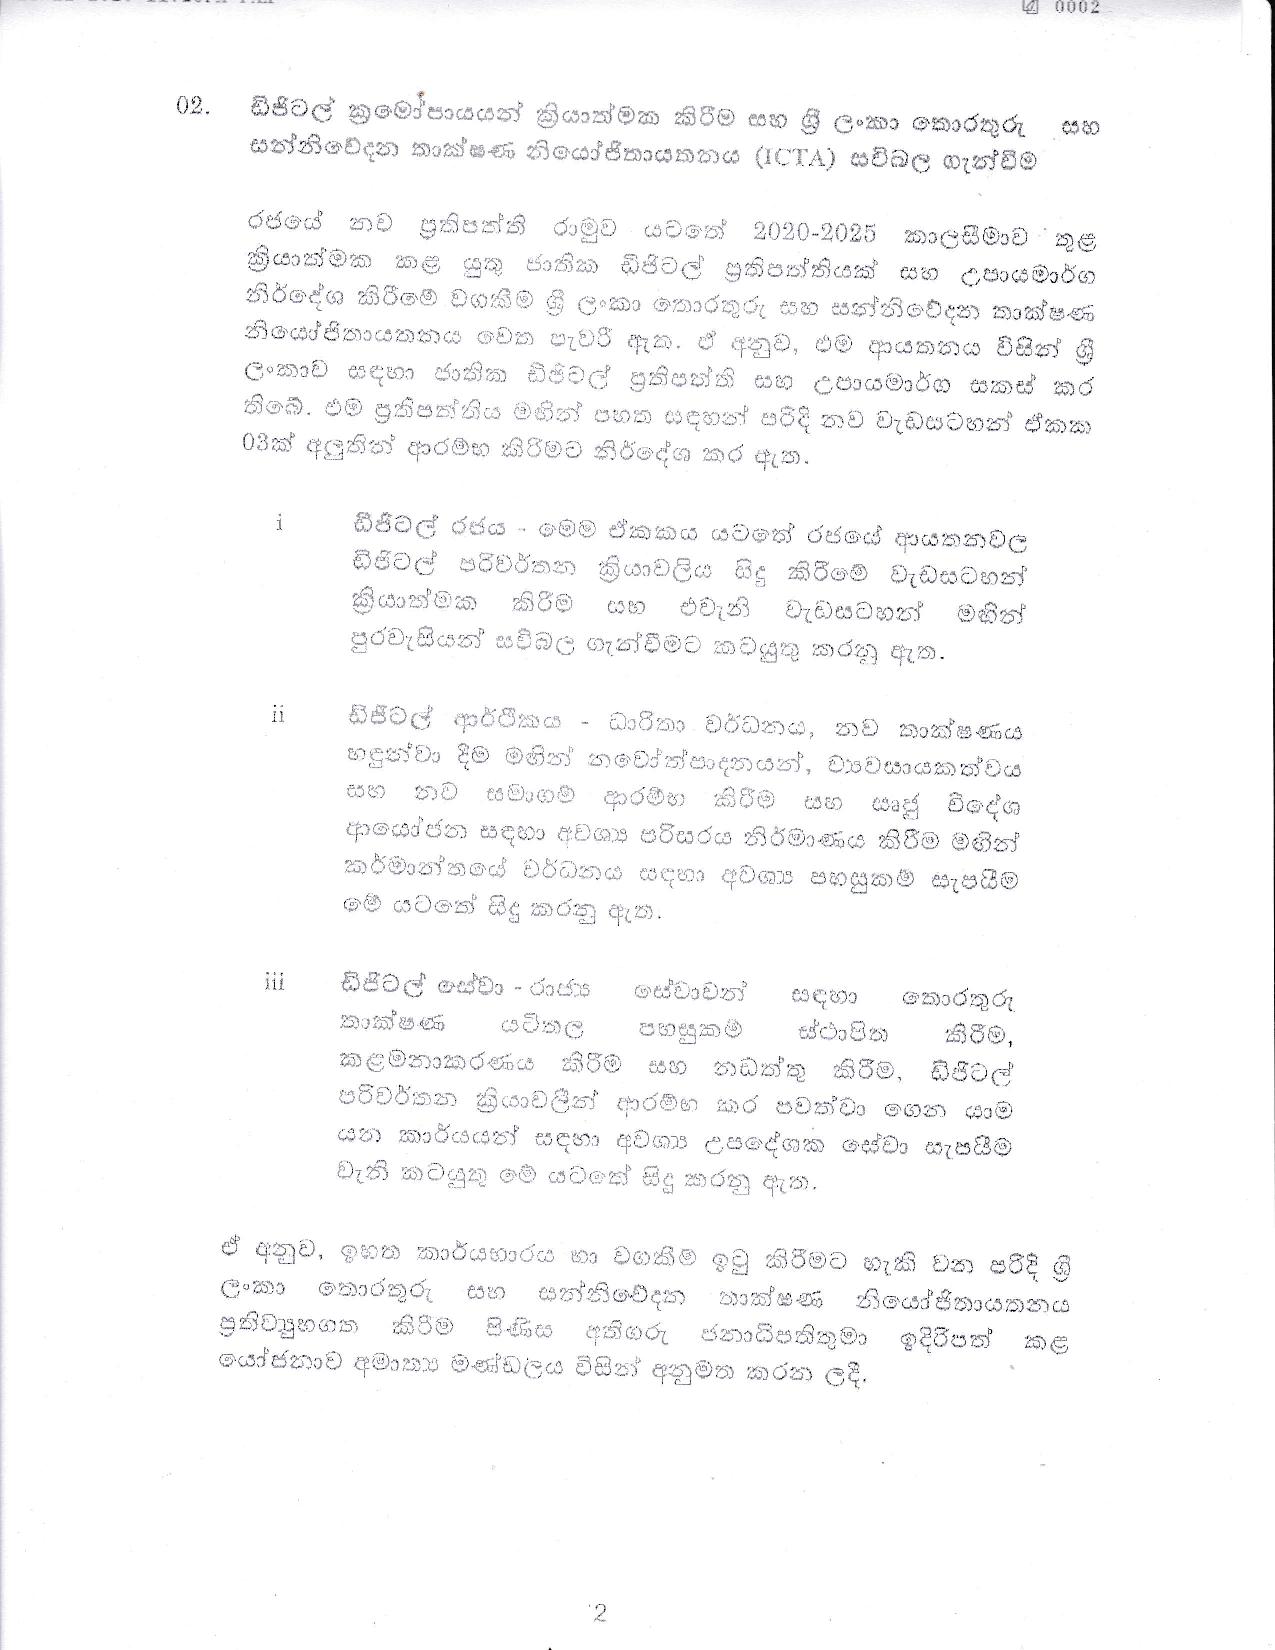 Cabinet Decision on 16.11.2020 page 002